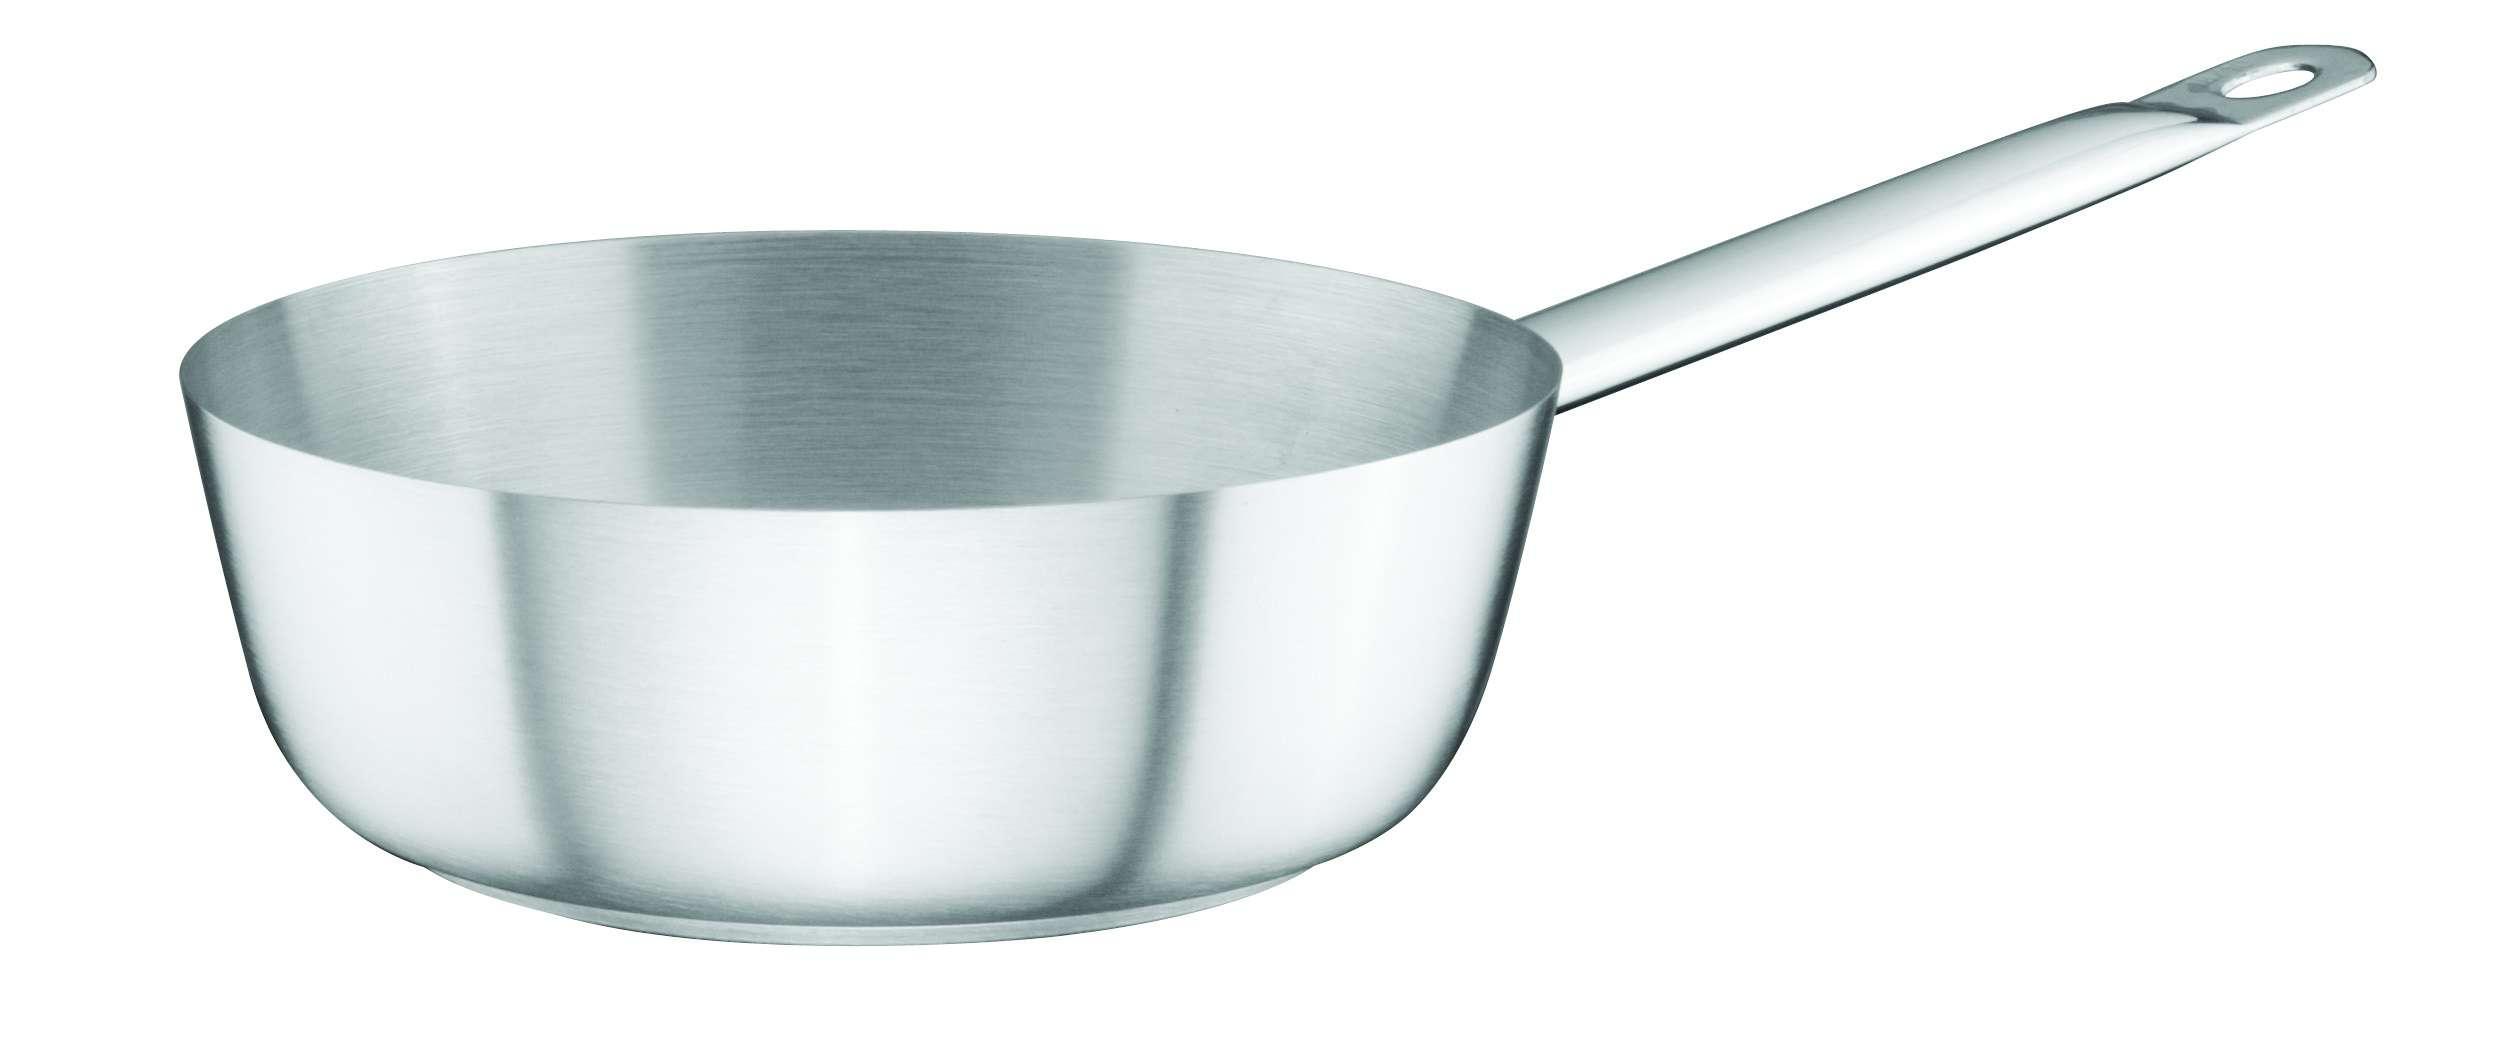 Ozti Stainless Steel Sauteuse 22 cm x 7 cm Silver Stainless Steel